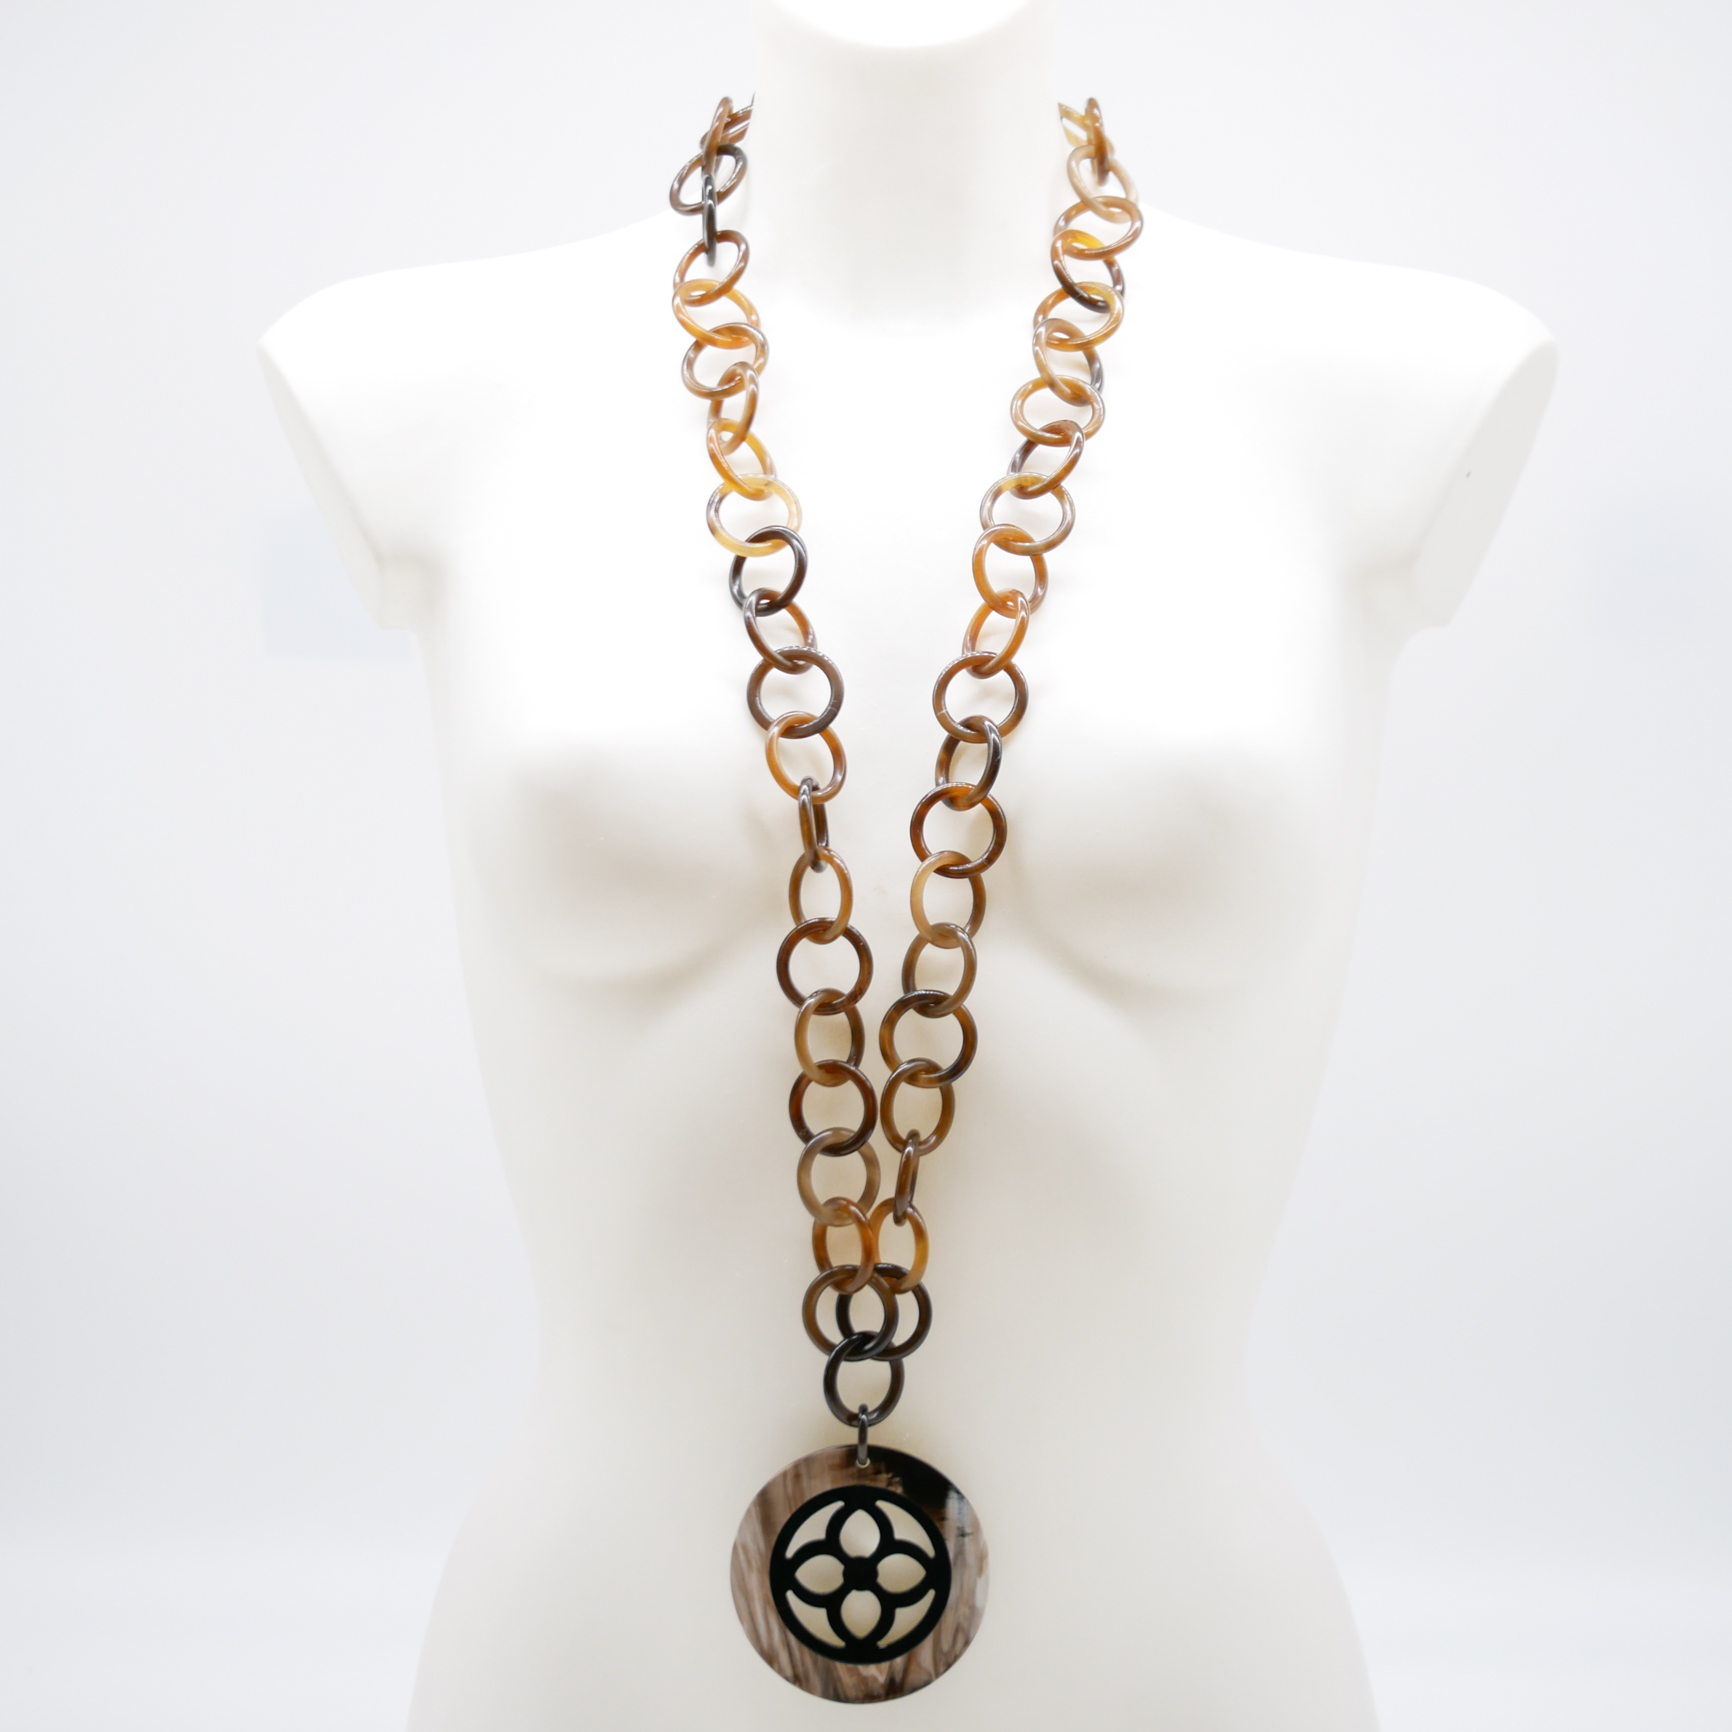 "Craft Art", horn necklace, long brown and black horn necklace with pendant